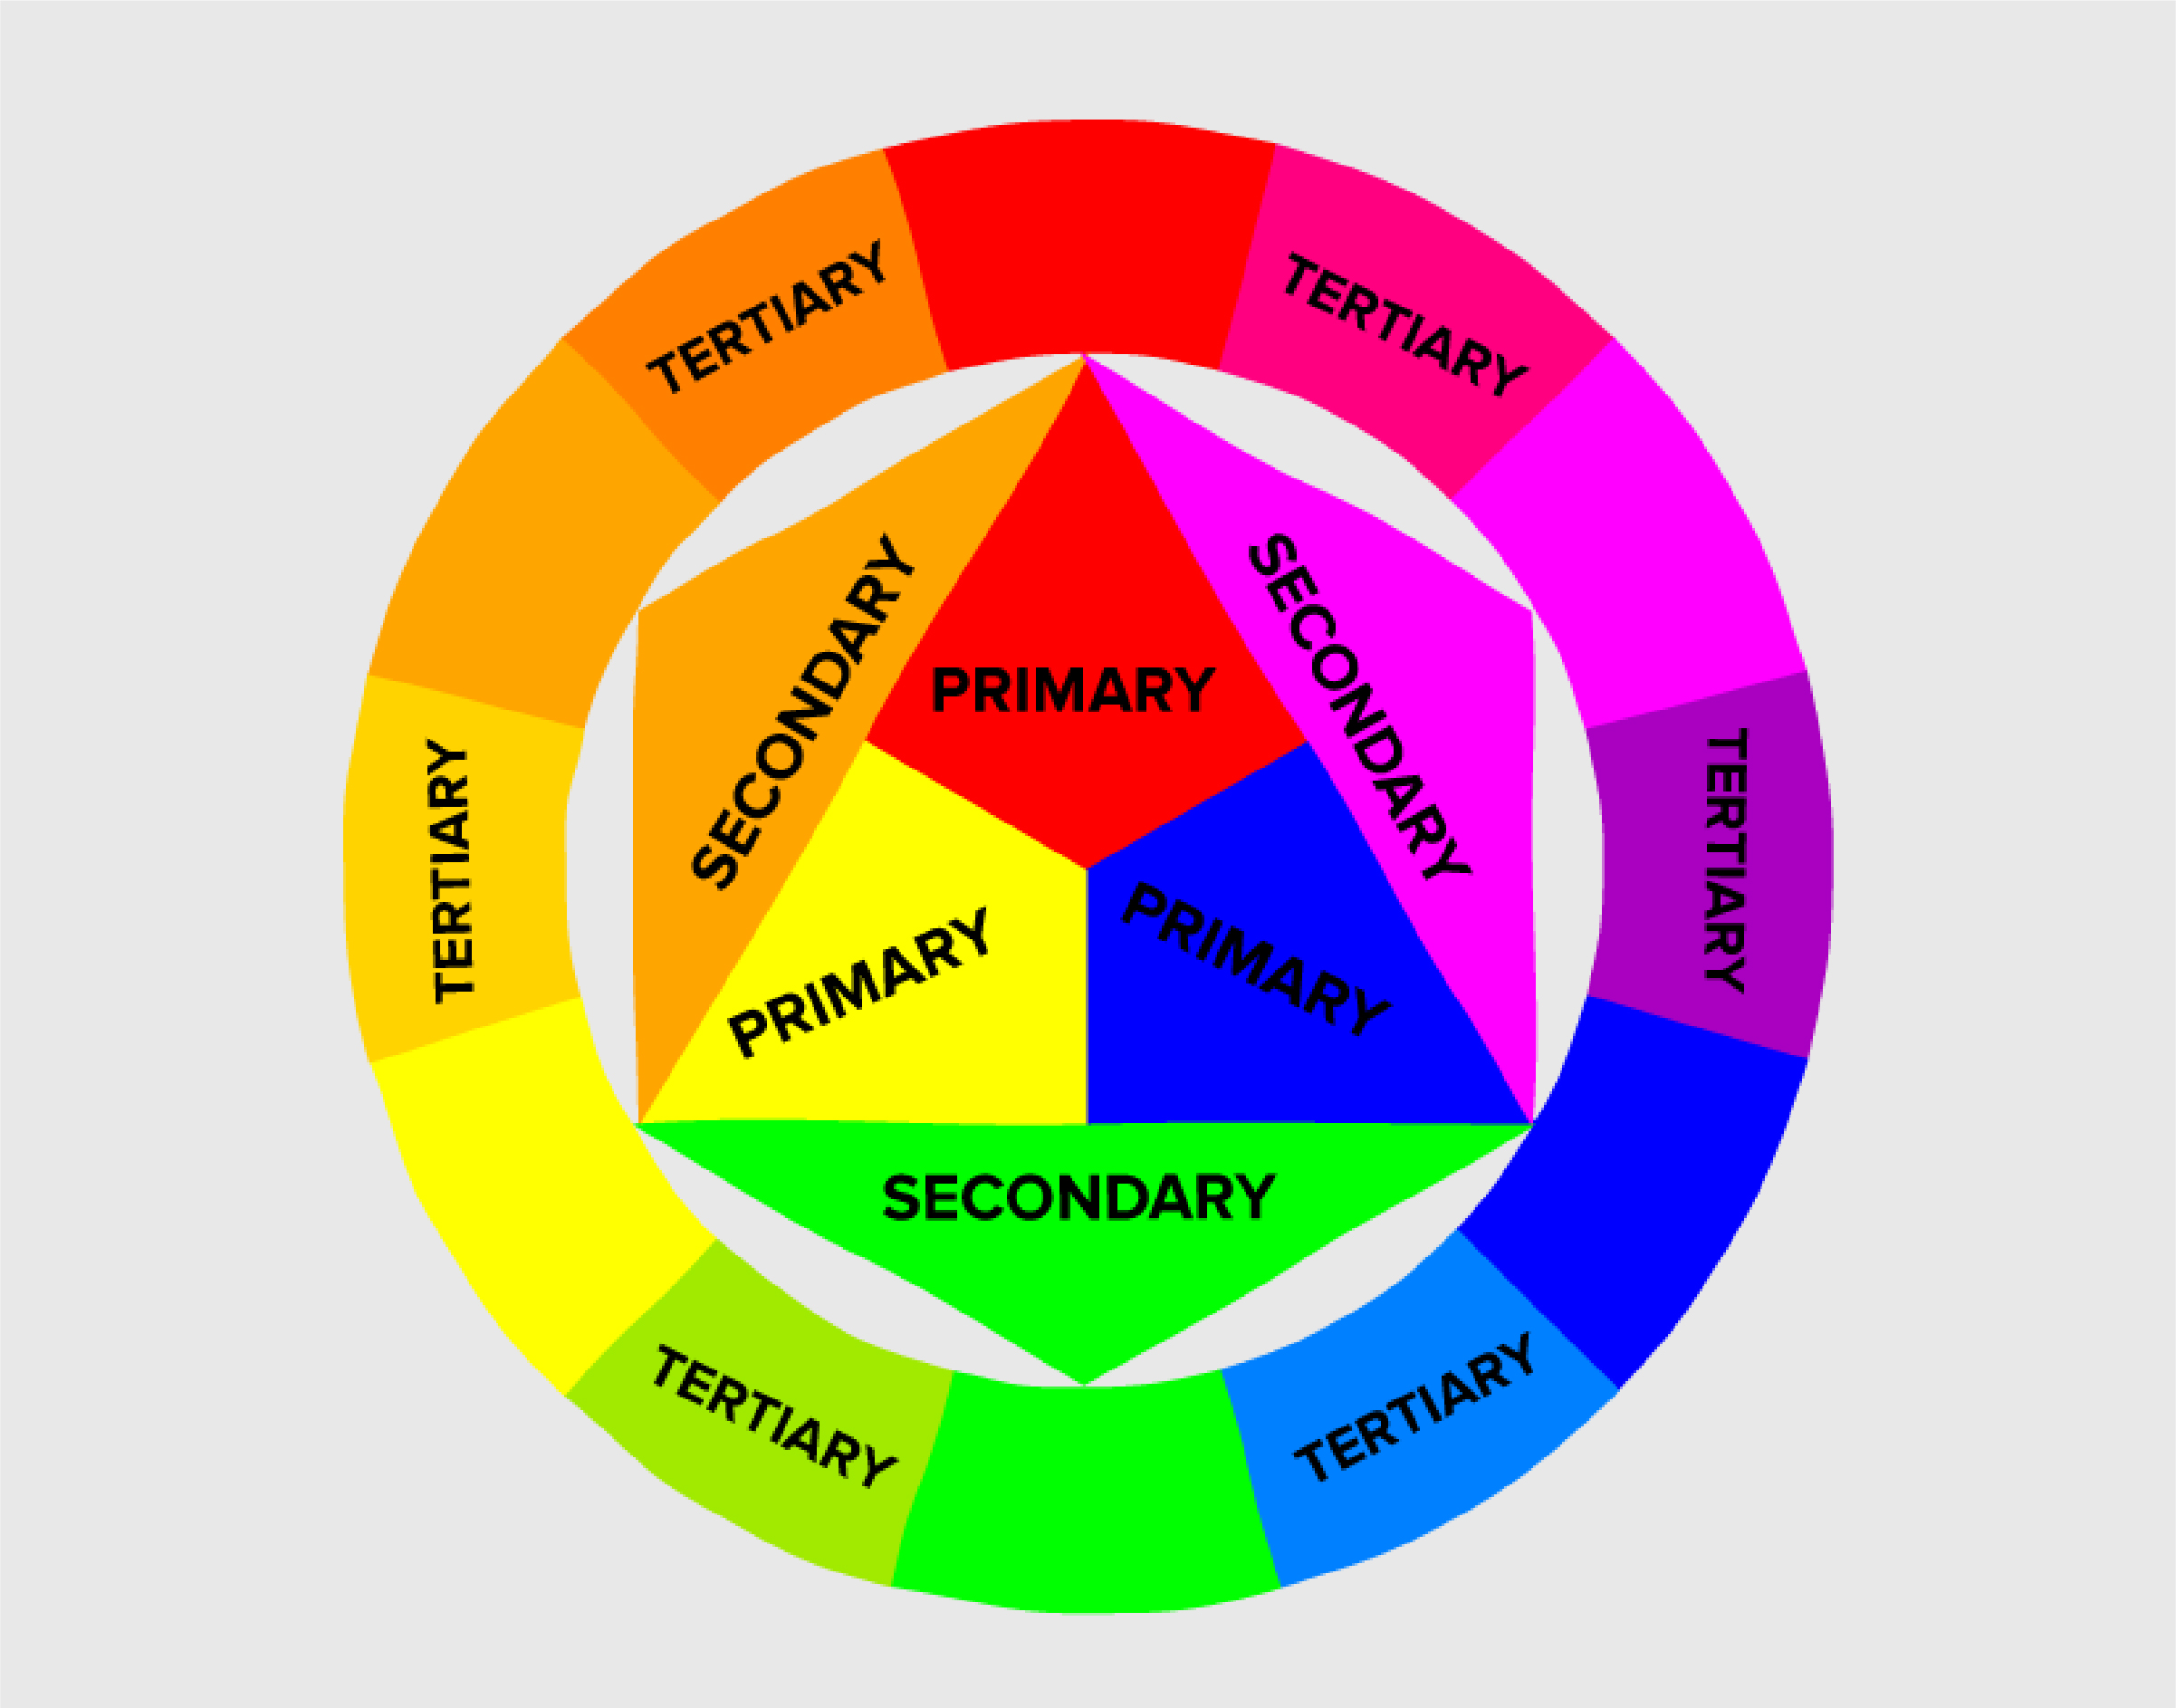 Color theory studies how colors interact with each other and how the human eye perceives them